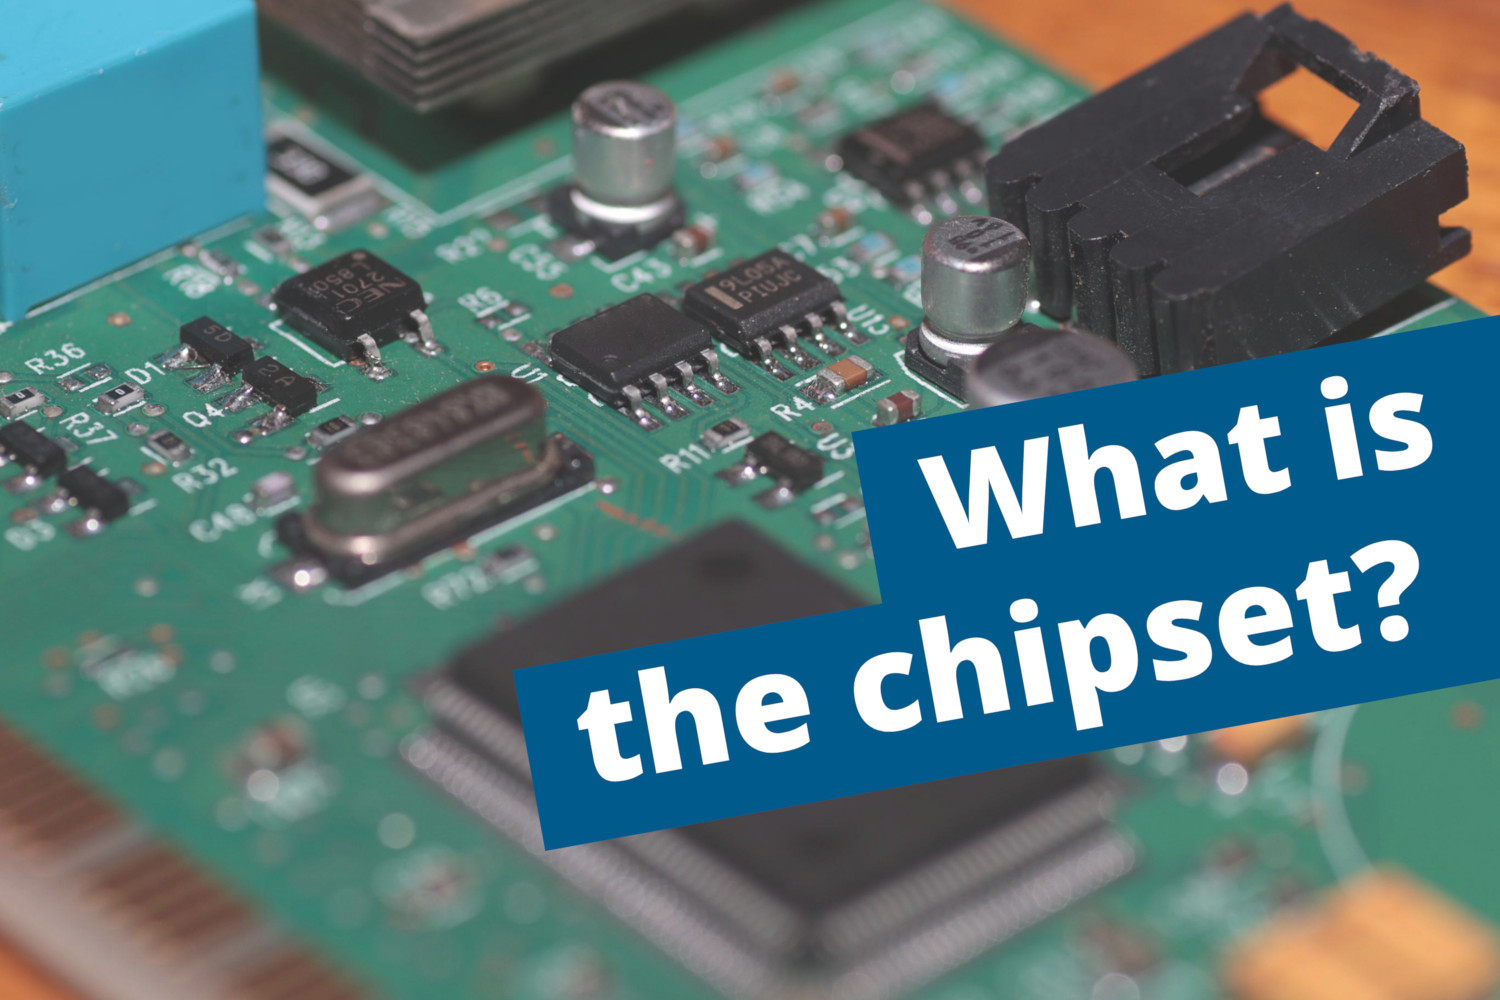 What is the chipset?